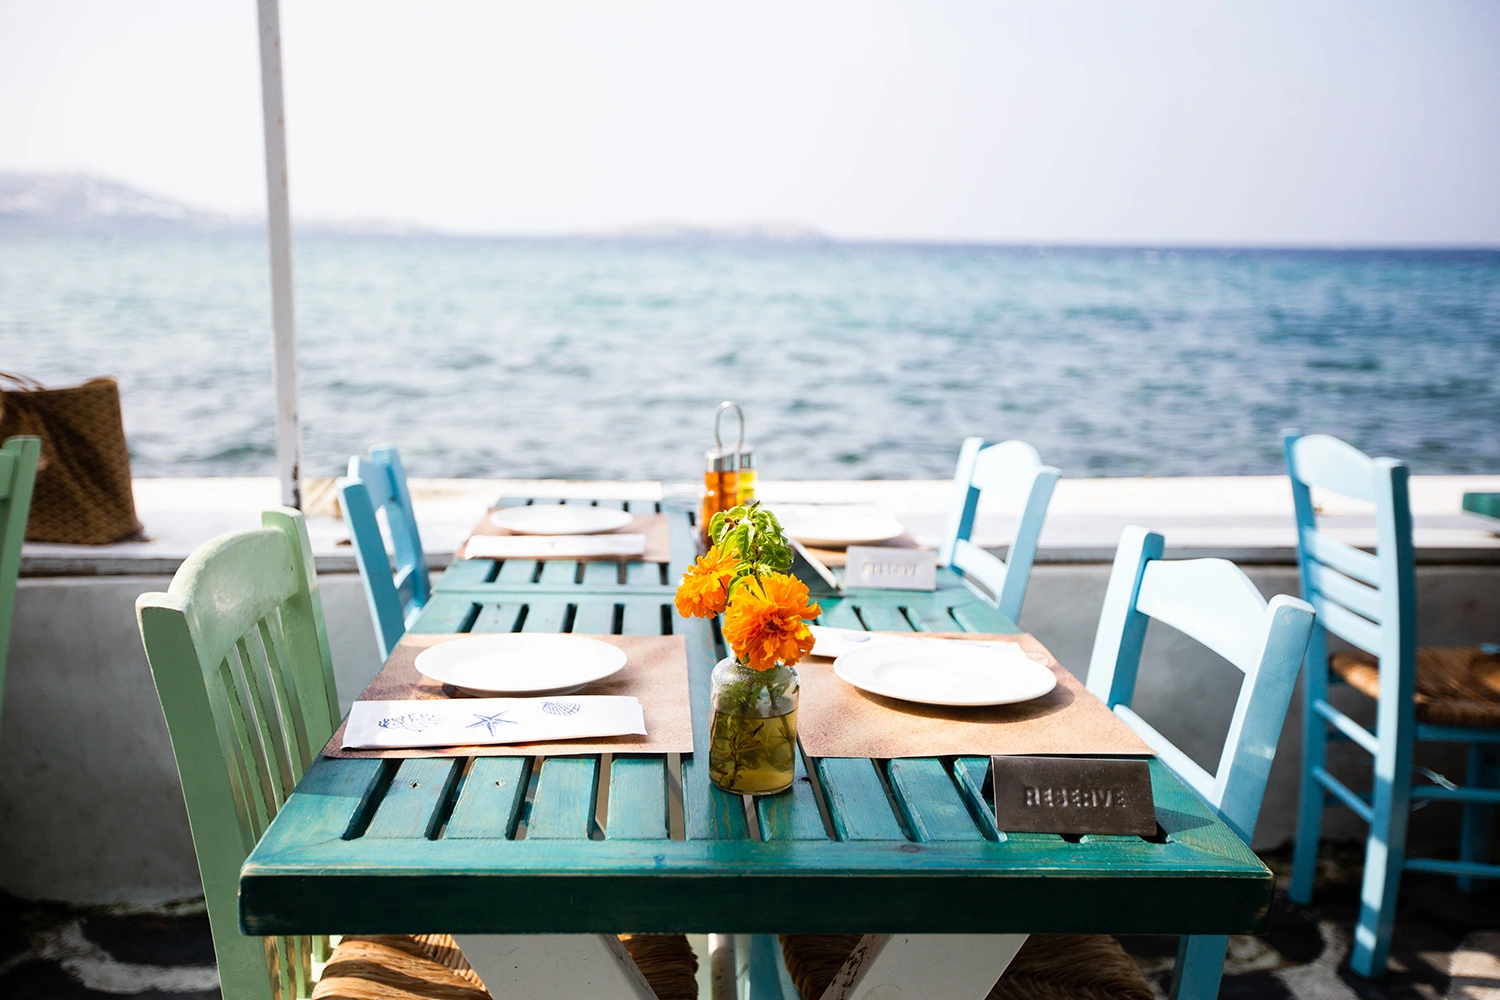 A blue table and chairs on a deck overlooking the ocean at an outdoor eatery.